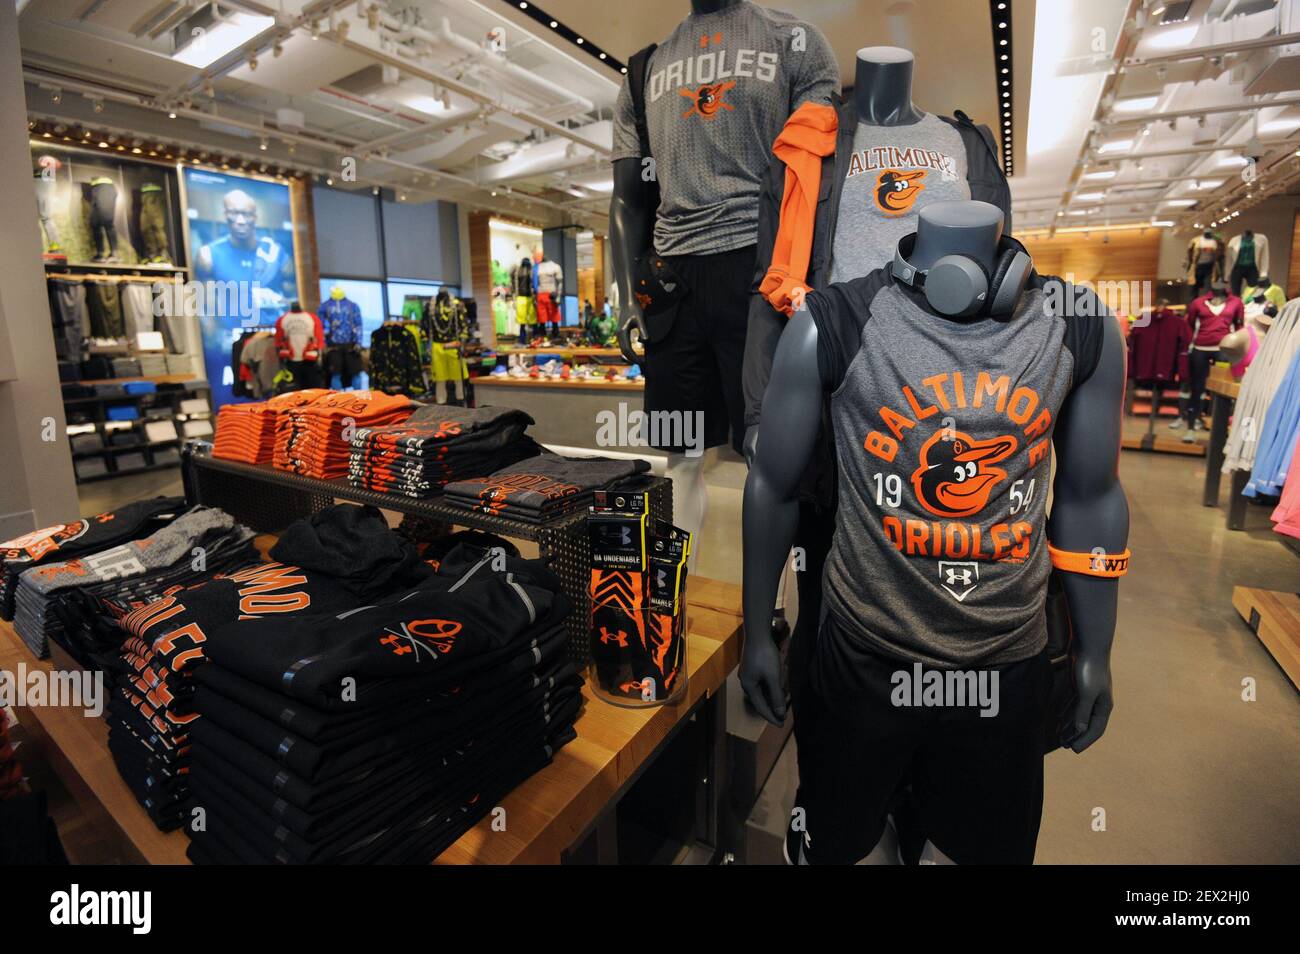 Under Armour Baltimore Orioles gear is displayed near the front of